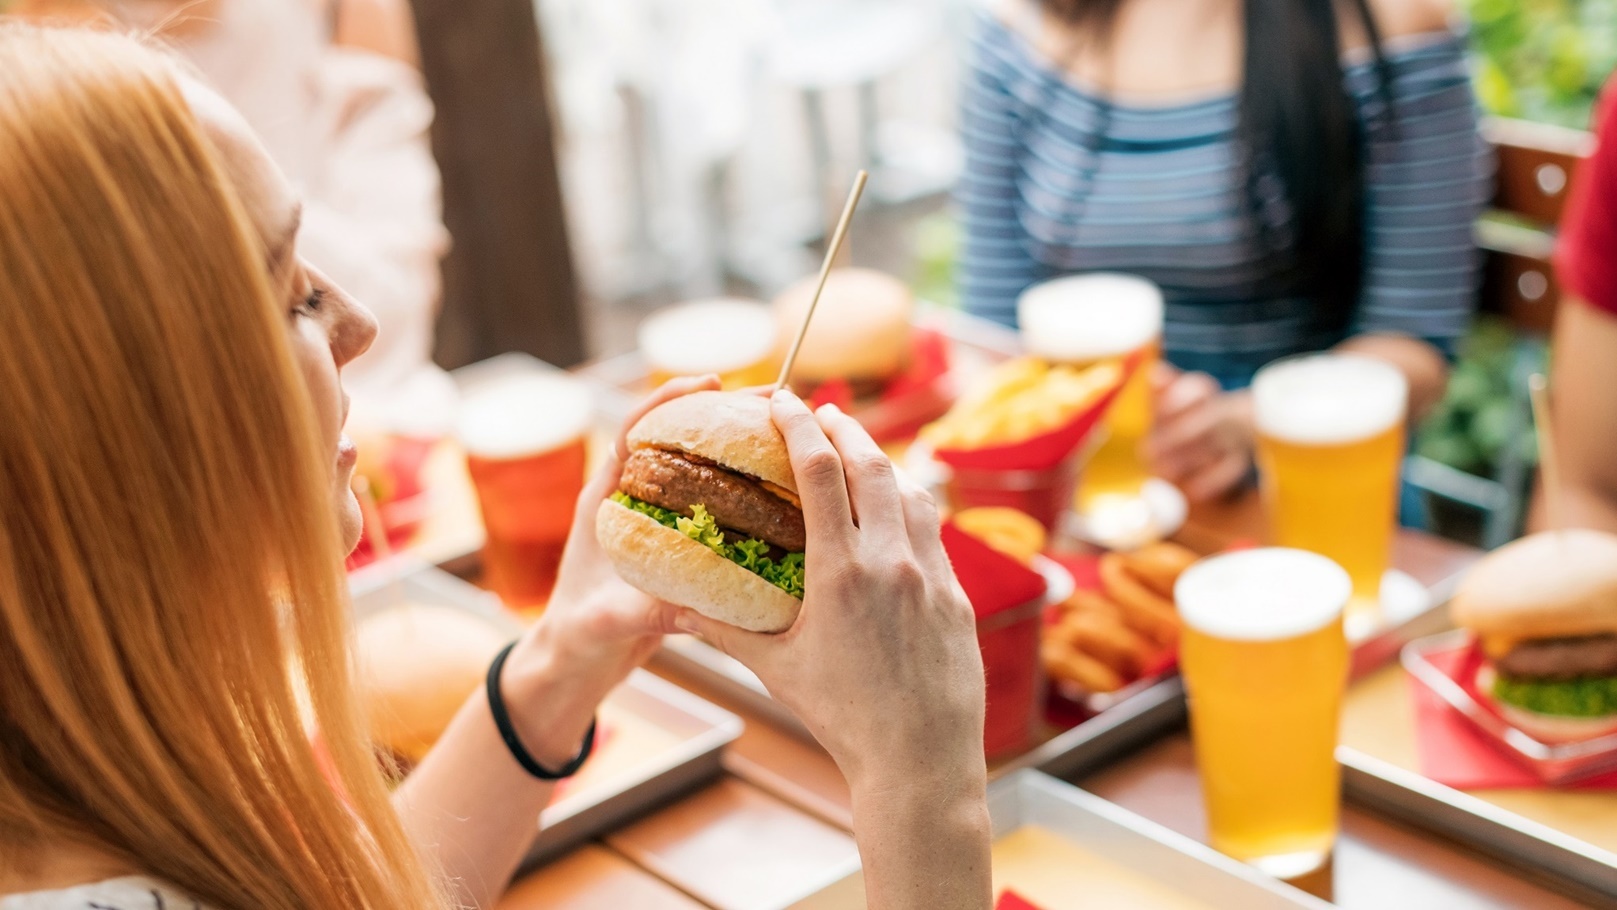 woman-with-burger-having-lunch-with-friends-2021-10-27-22-22-49-utc